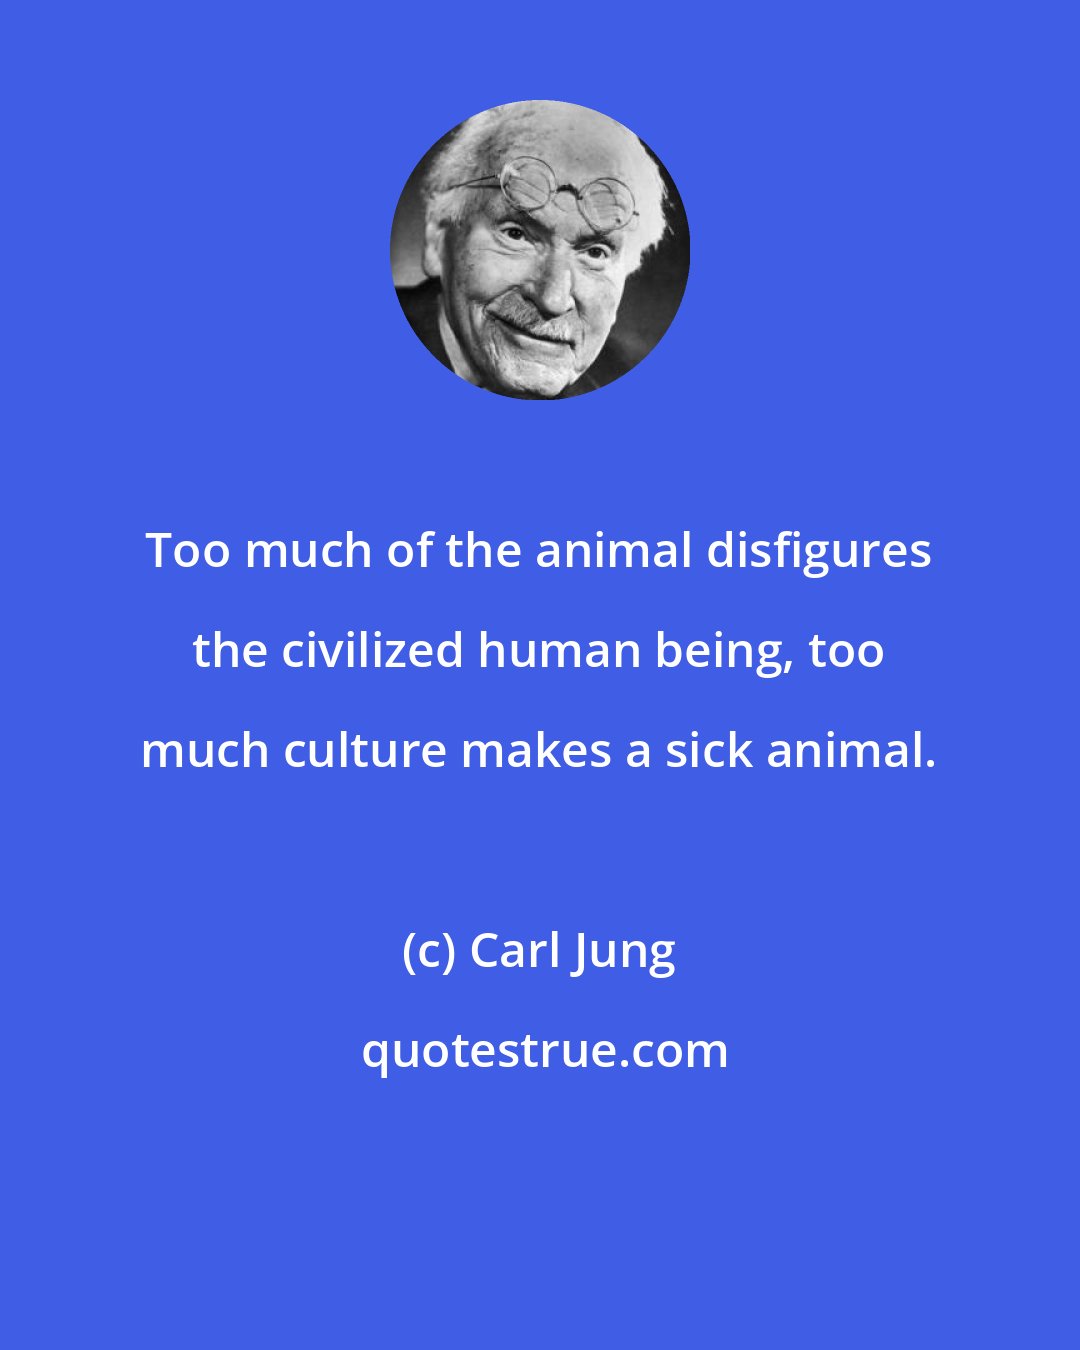 Carl Jung: Too much of the animal disfigures the civilized human being, too much culture makes a sick animal.